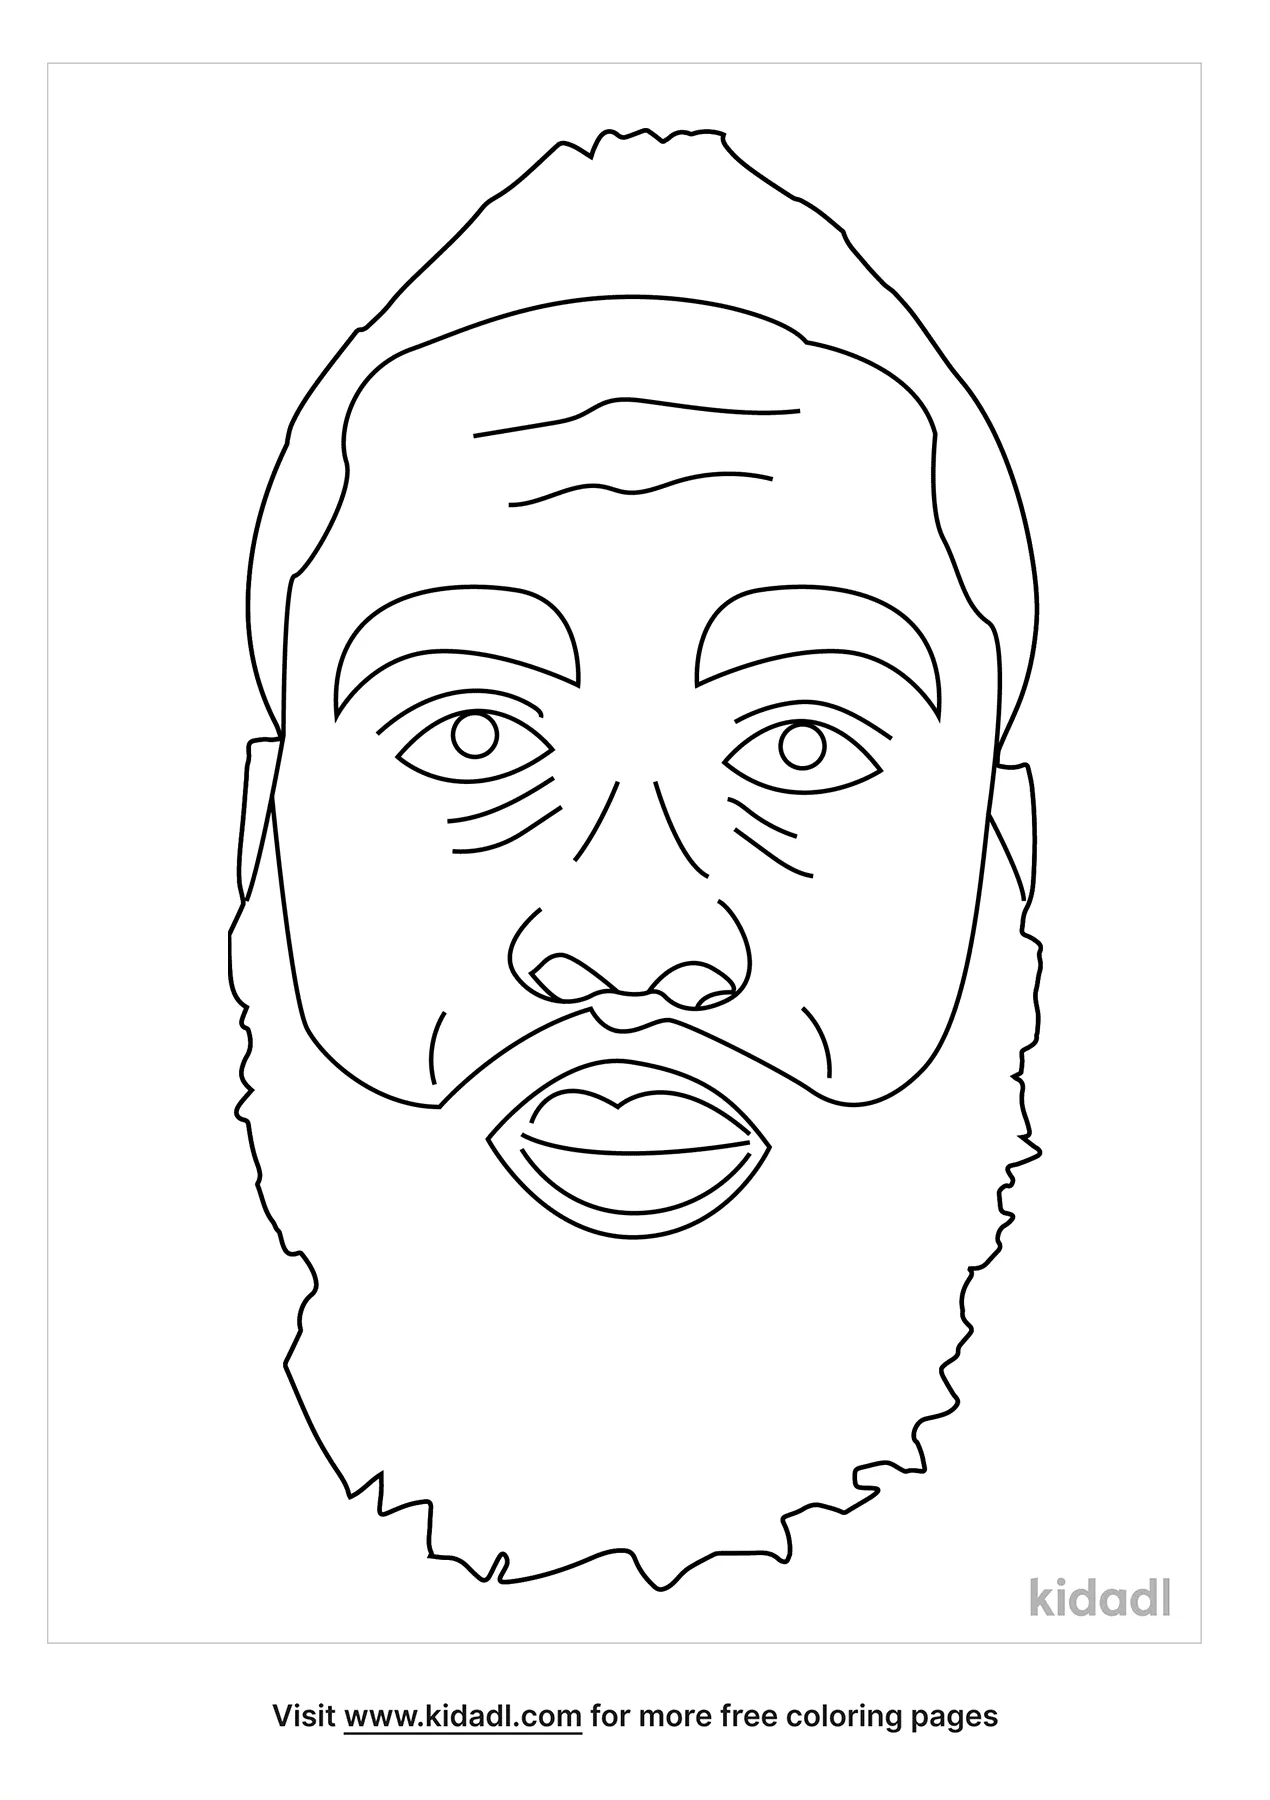 28+ james harden coloring pages | LanyaLeelyla